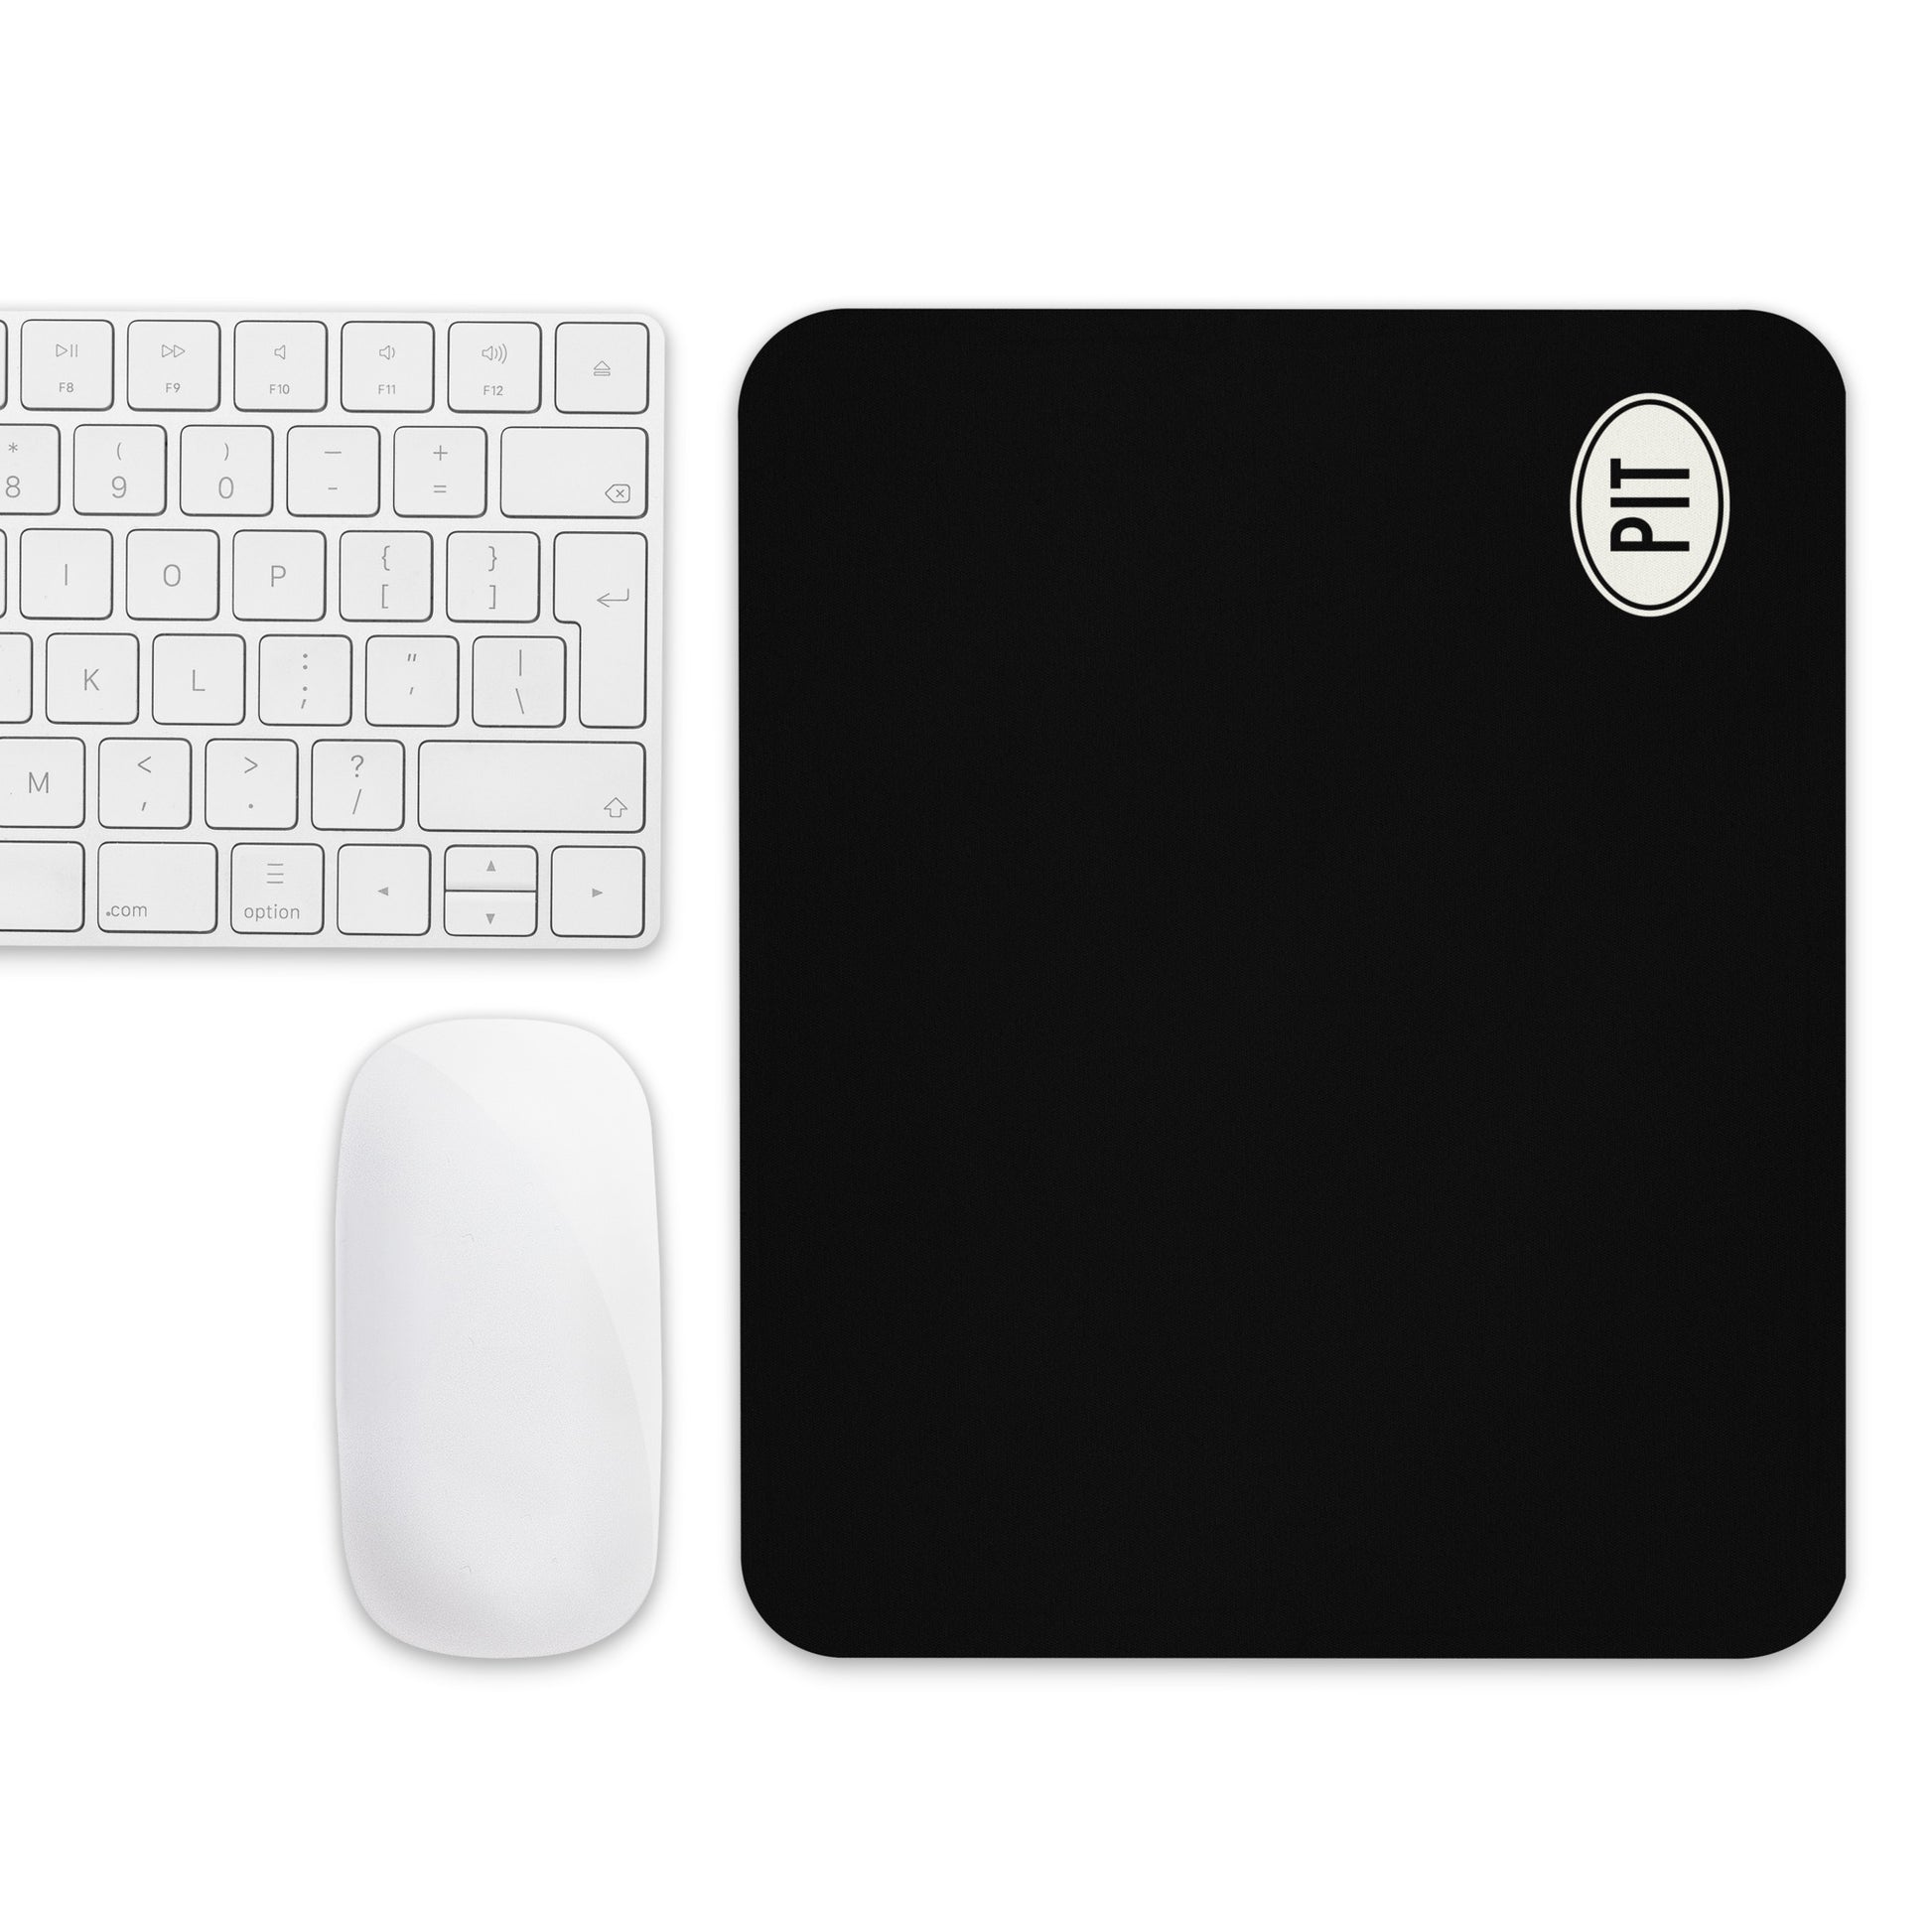 Unique Travel Gift Mouse Pad - White Oval • PIT Pittsburgh • YHM Designs - Image 04